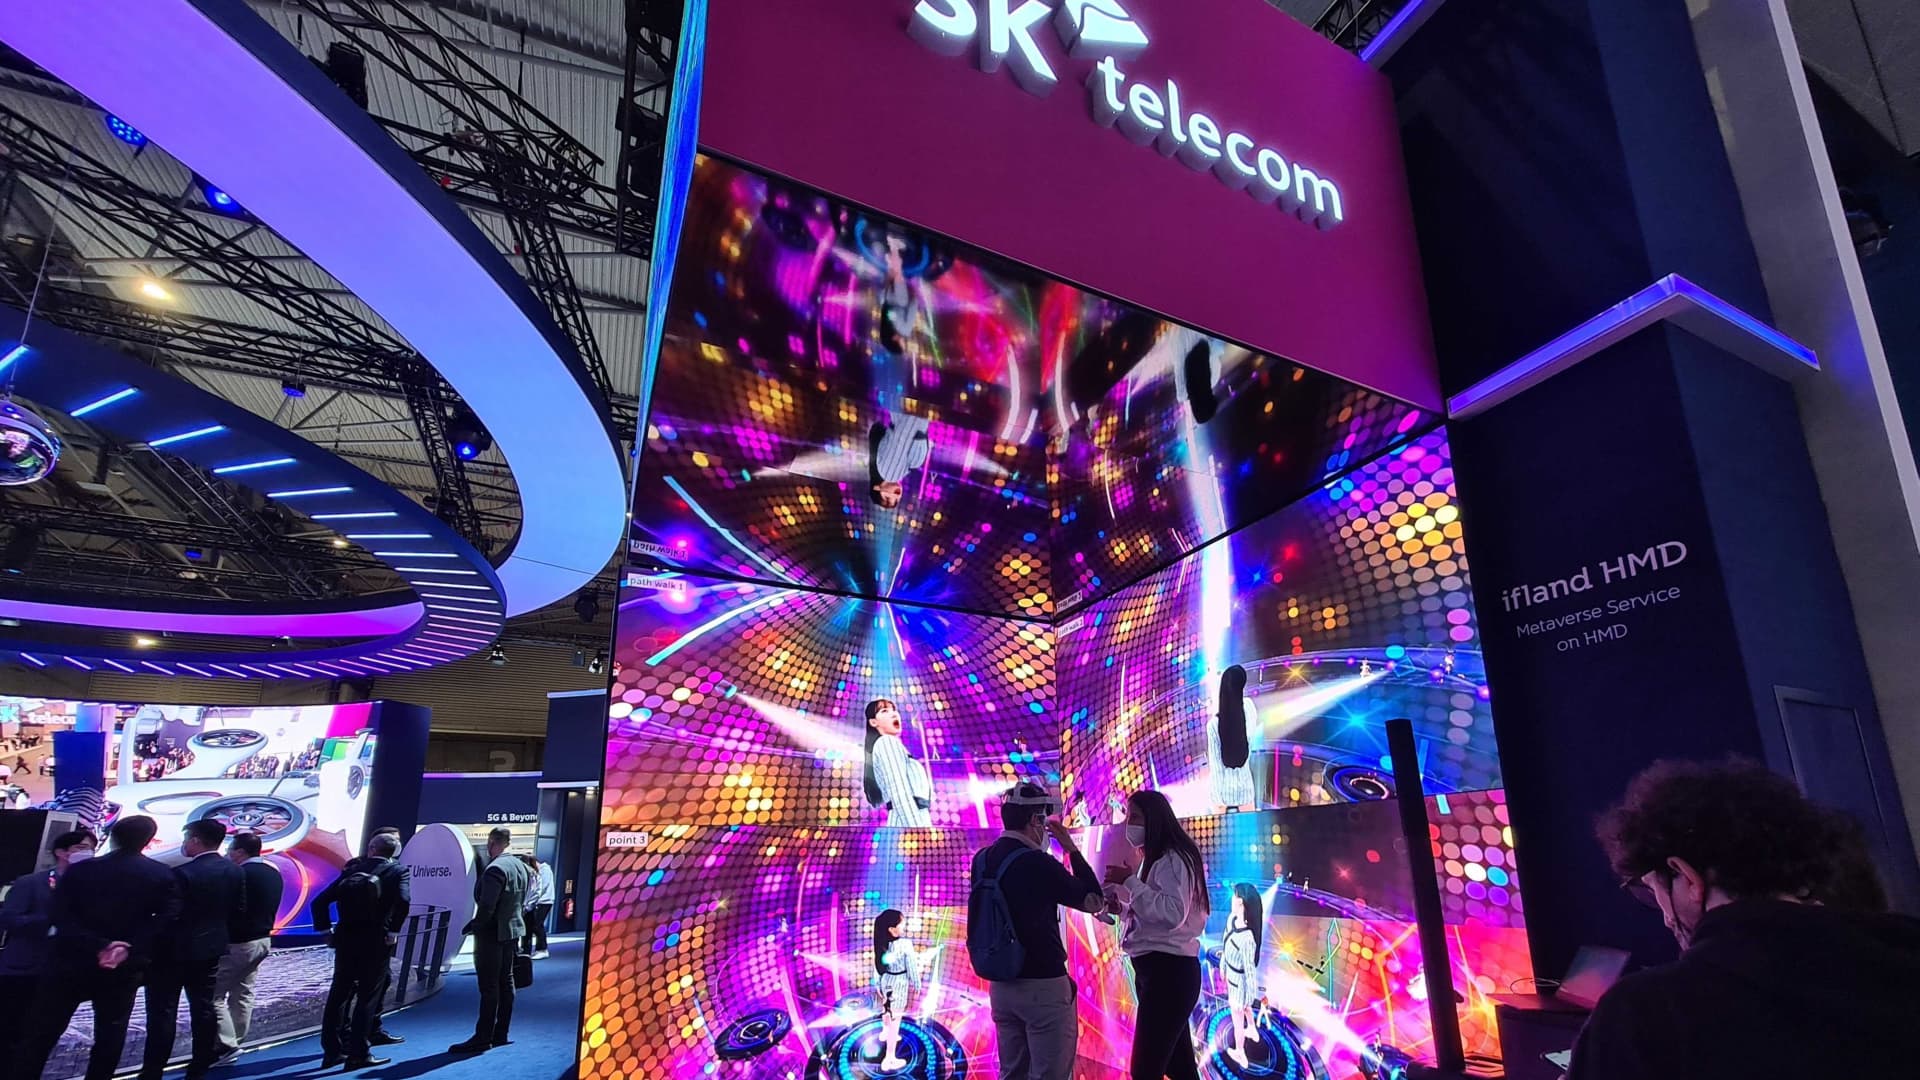 SK Telecom's stand at Mobile World Congress 2022 in Barcelona, Spain.